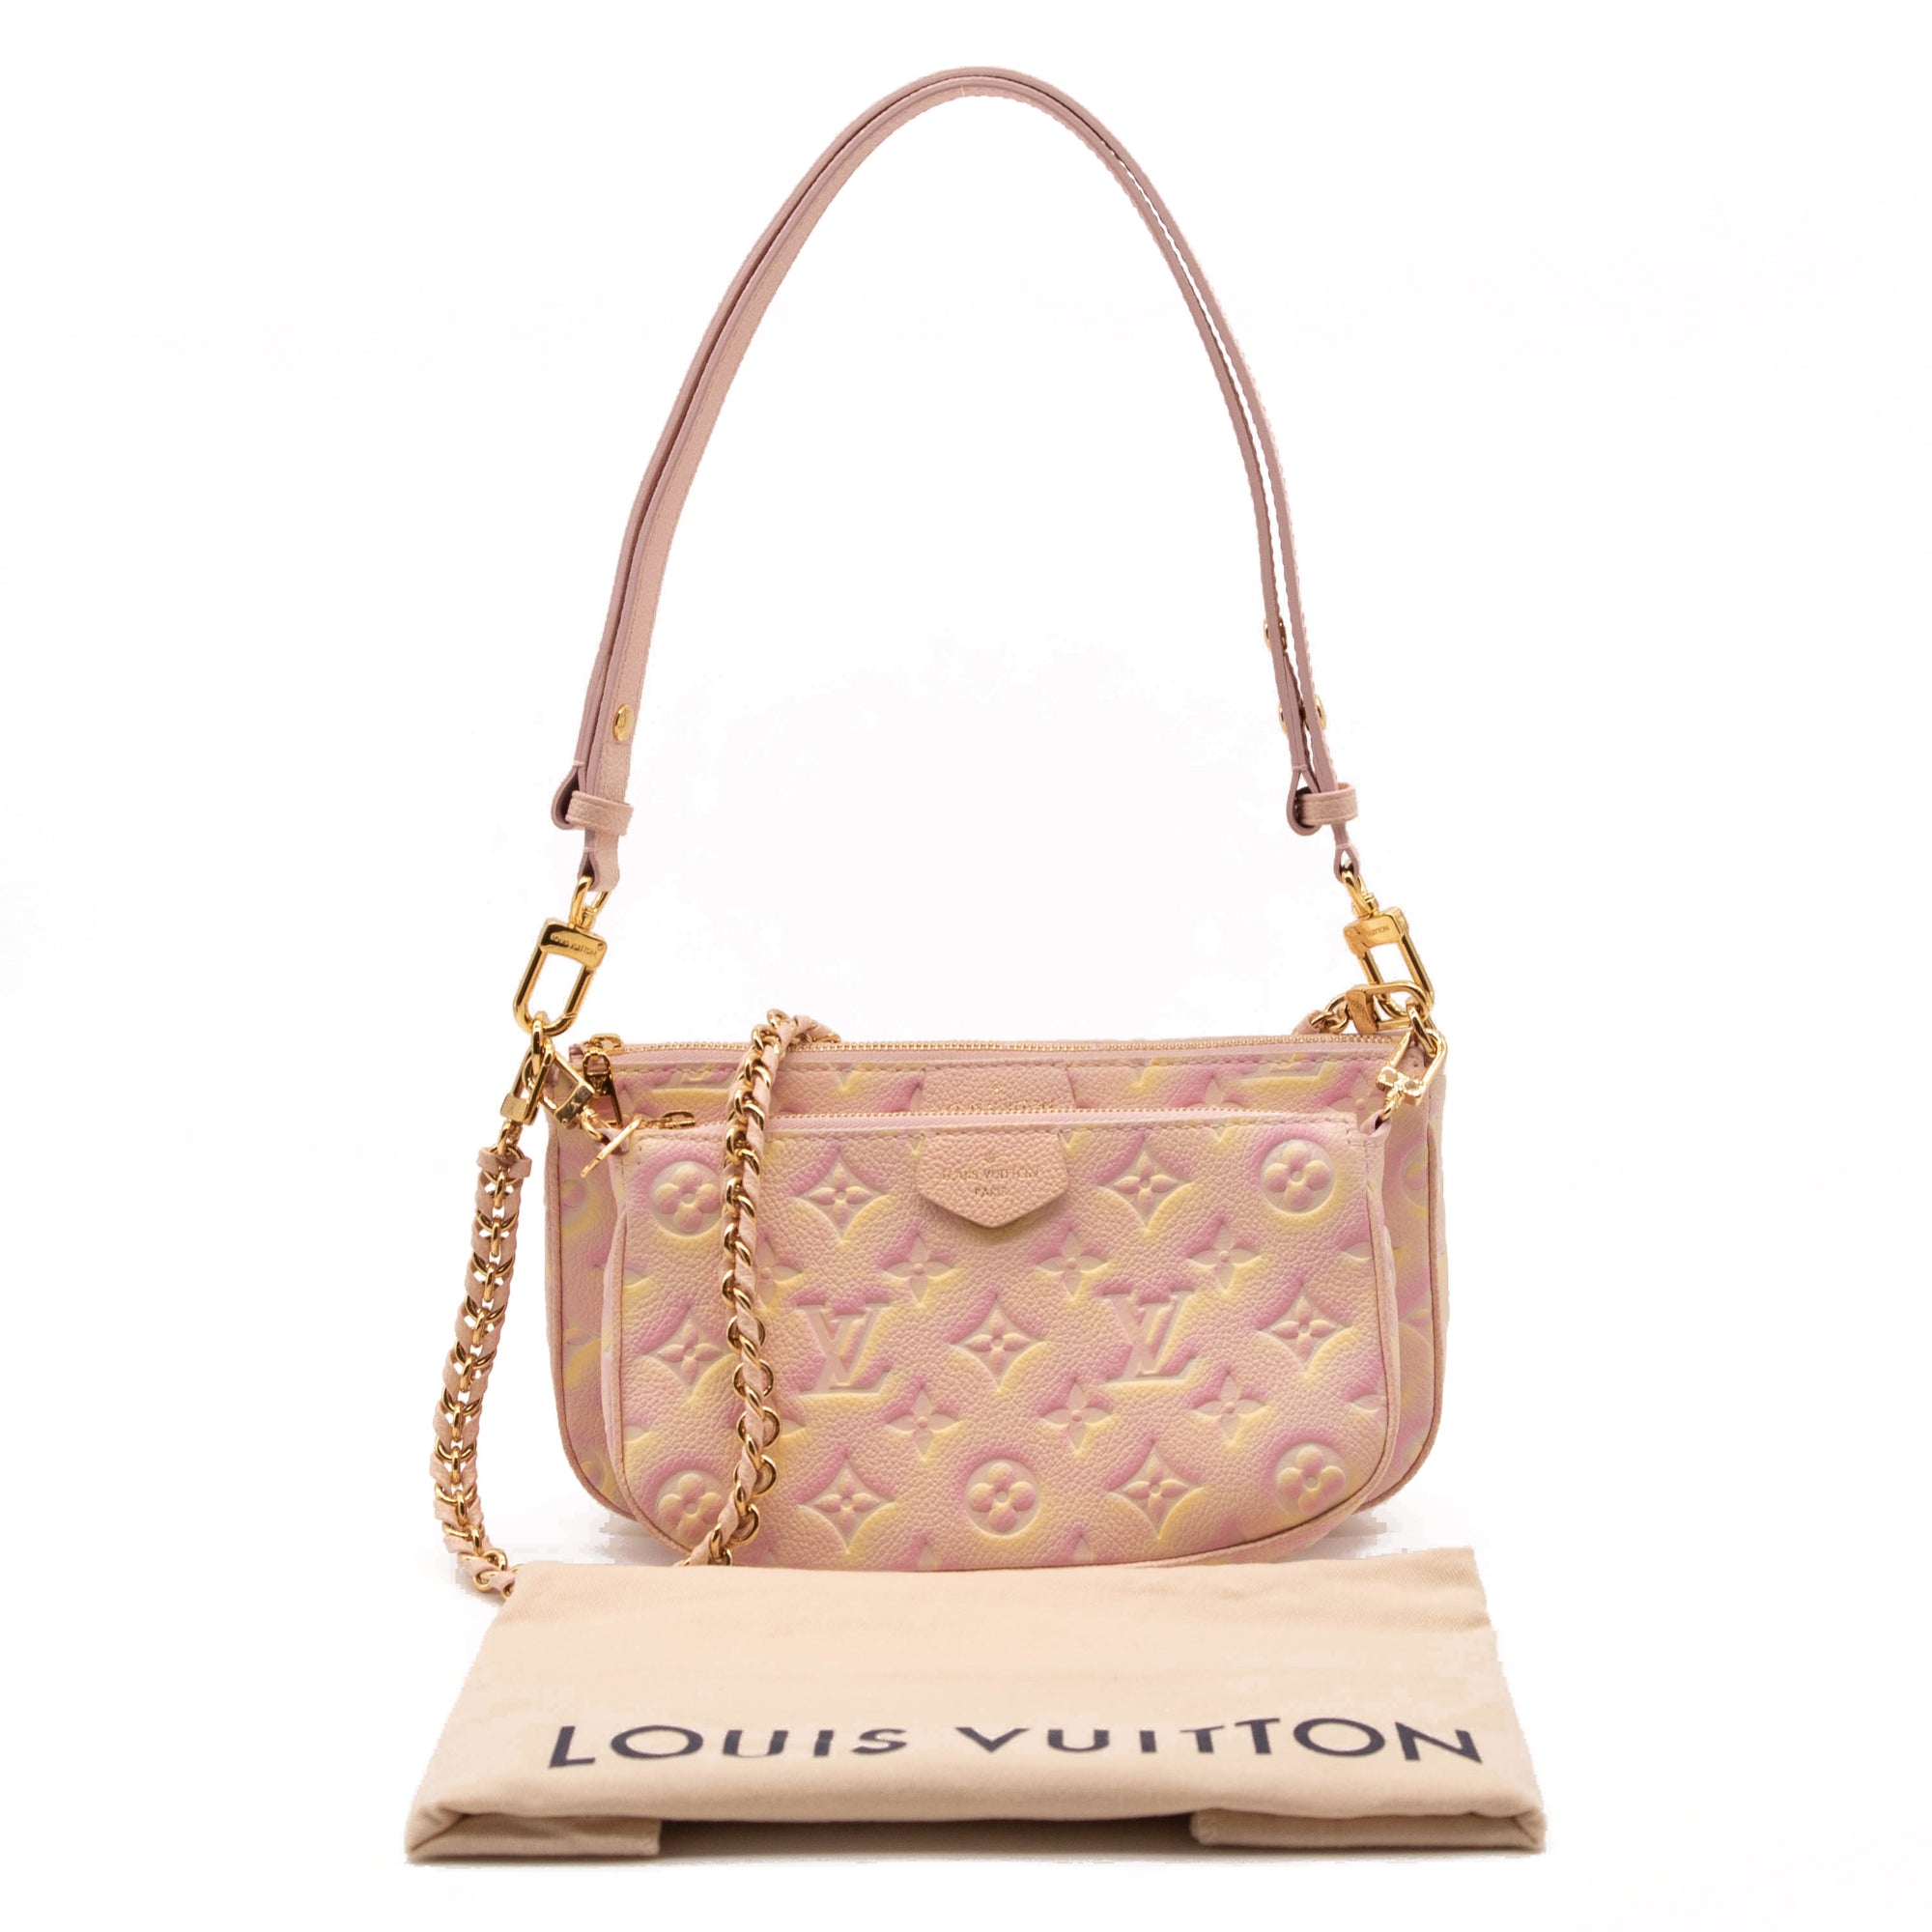 How To Shop Louis Vuitton's Summer Stardust Collection